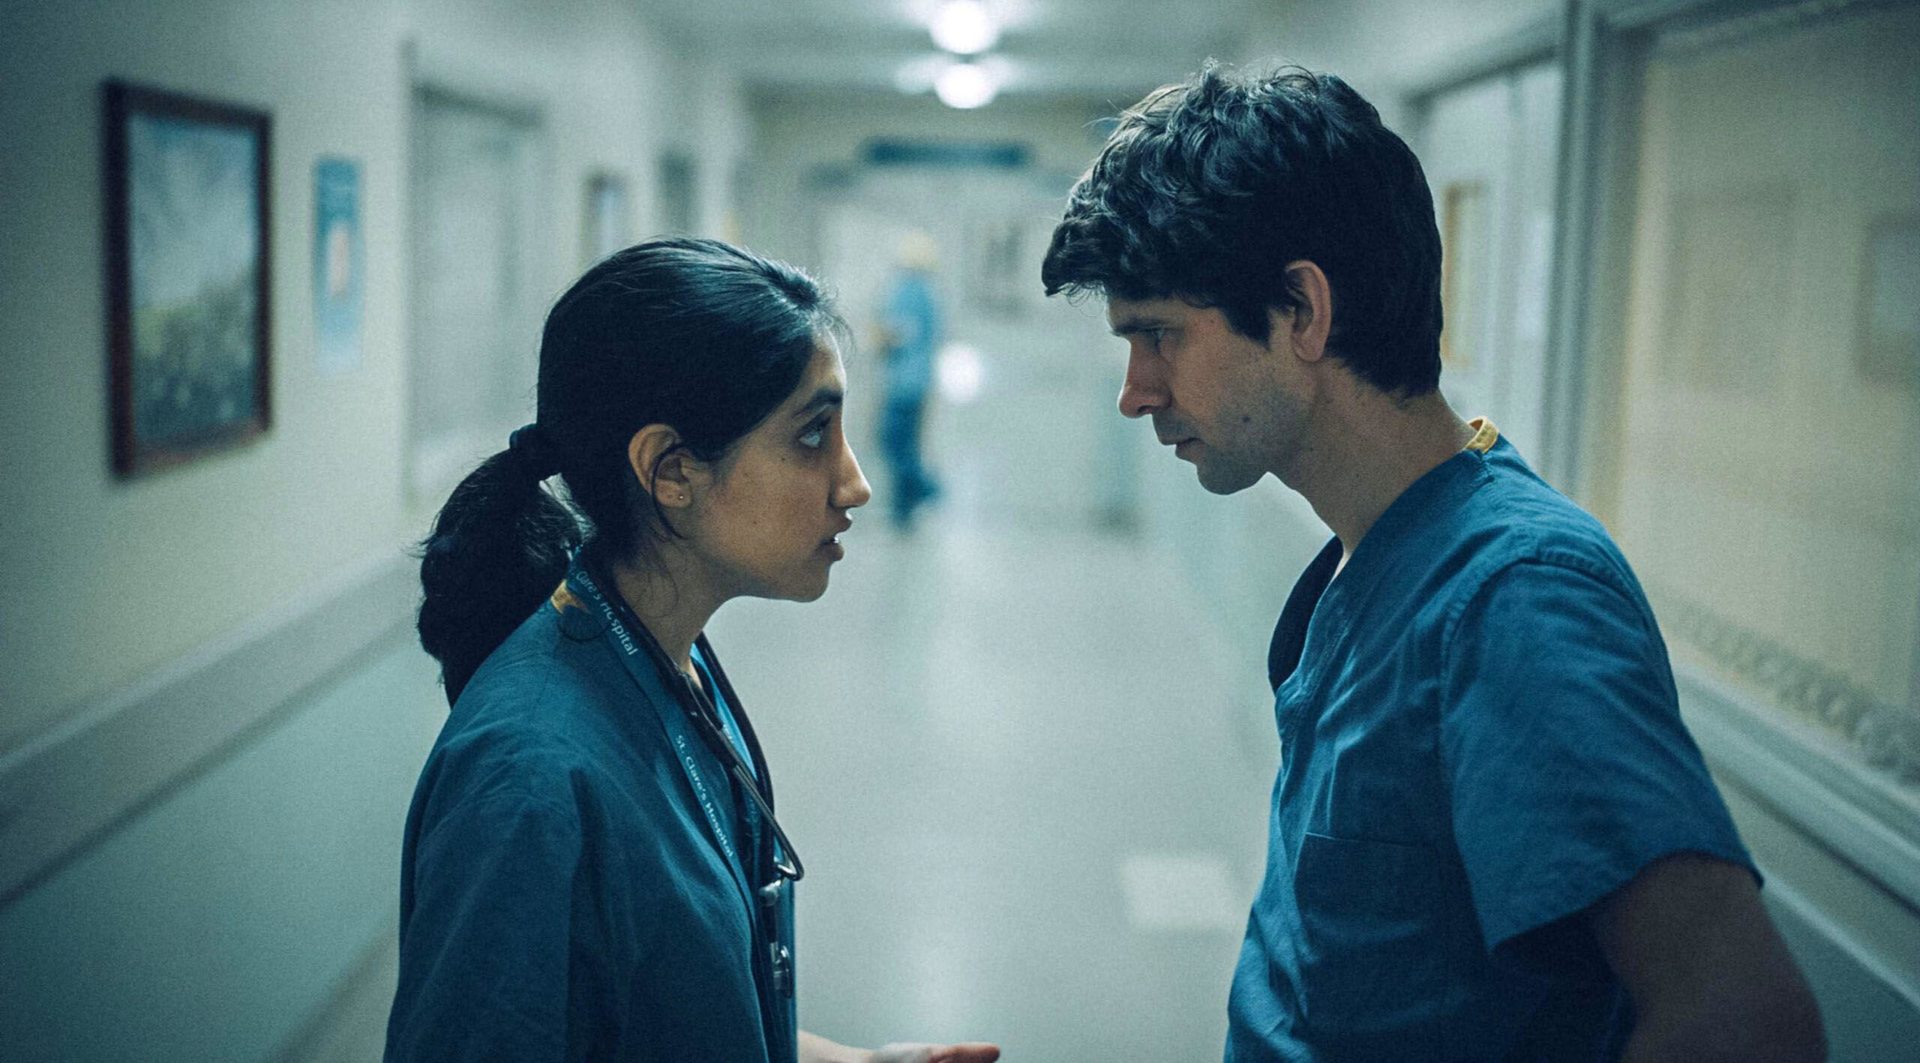 Ben Whishaw and Ambika Mod in This is Going to Hurt (2022) Written by Adam McKay . Credit: Bbc / Amc Studios / Album